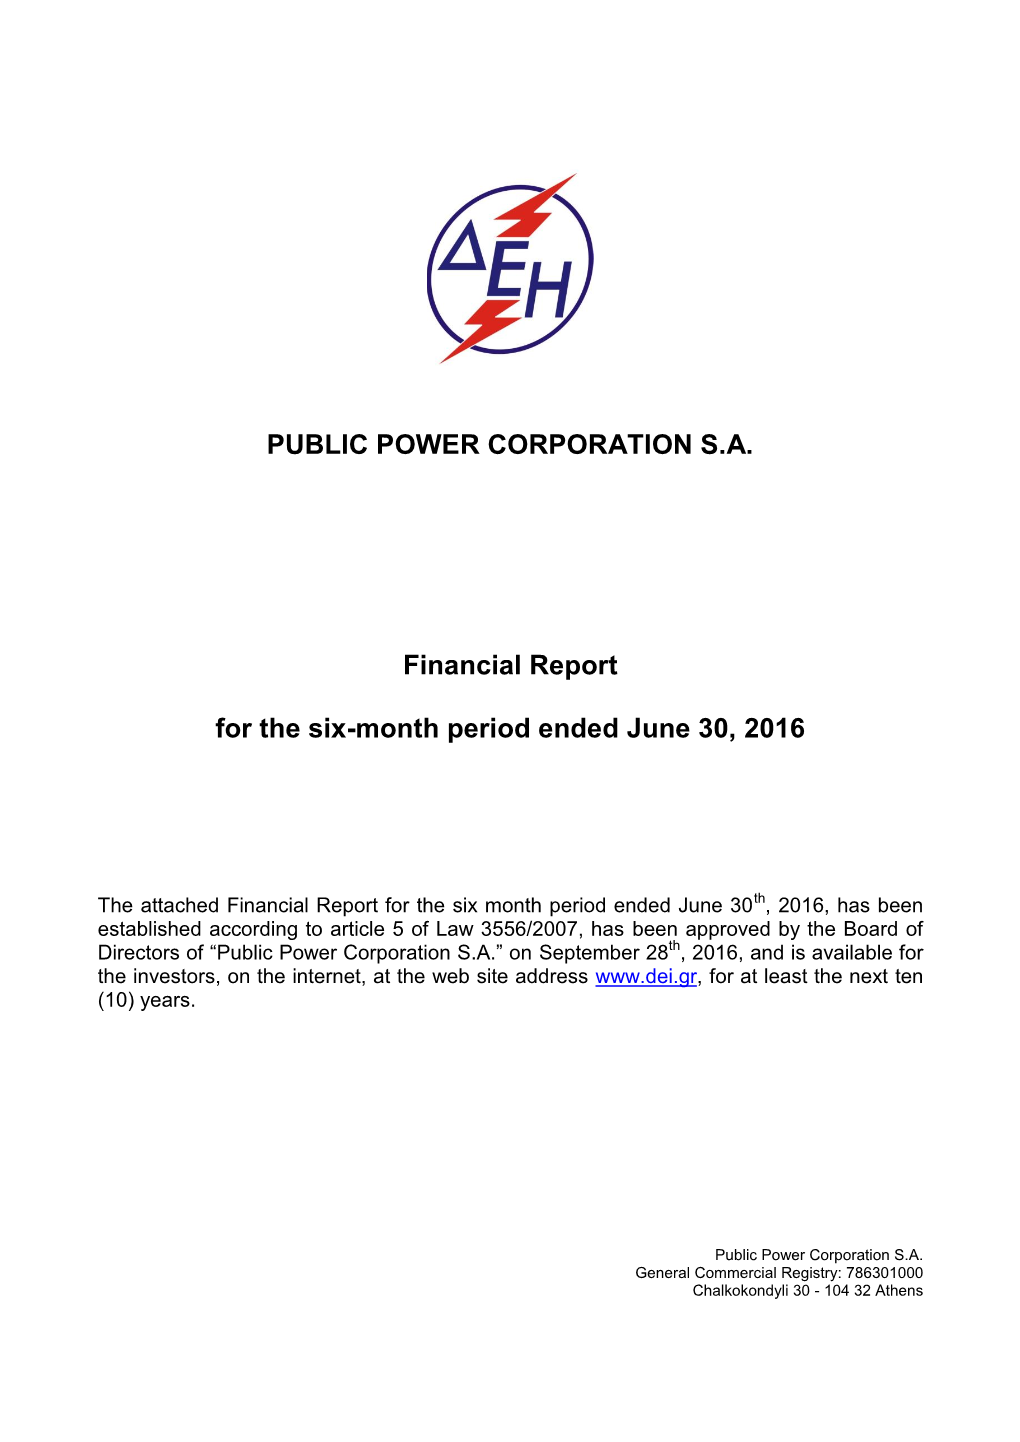 PUBLIC POWER CORPORATION S.A. Financial Report for the Six-Month